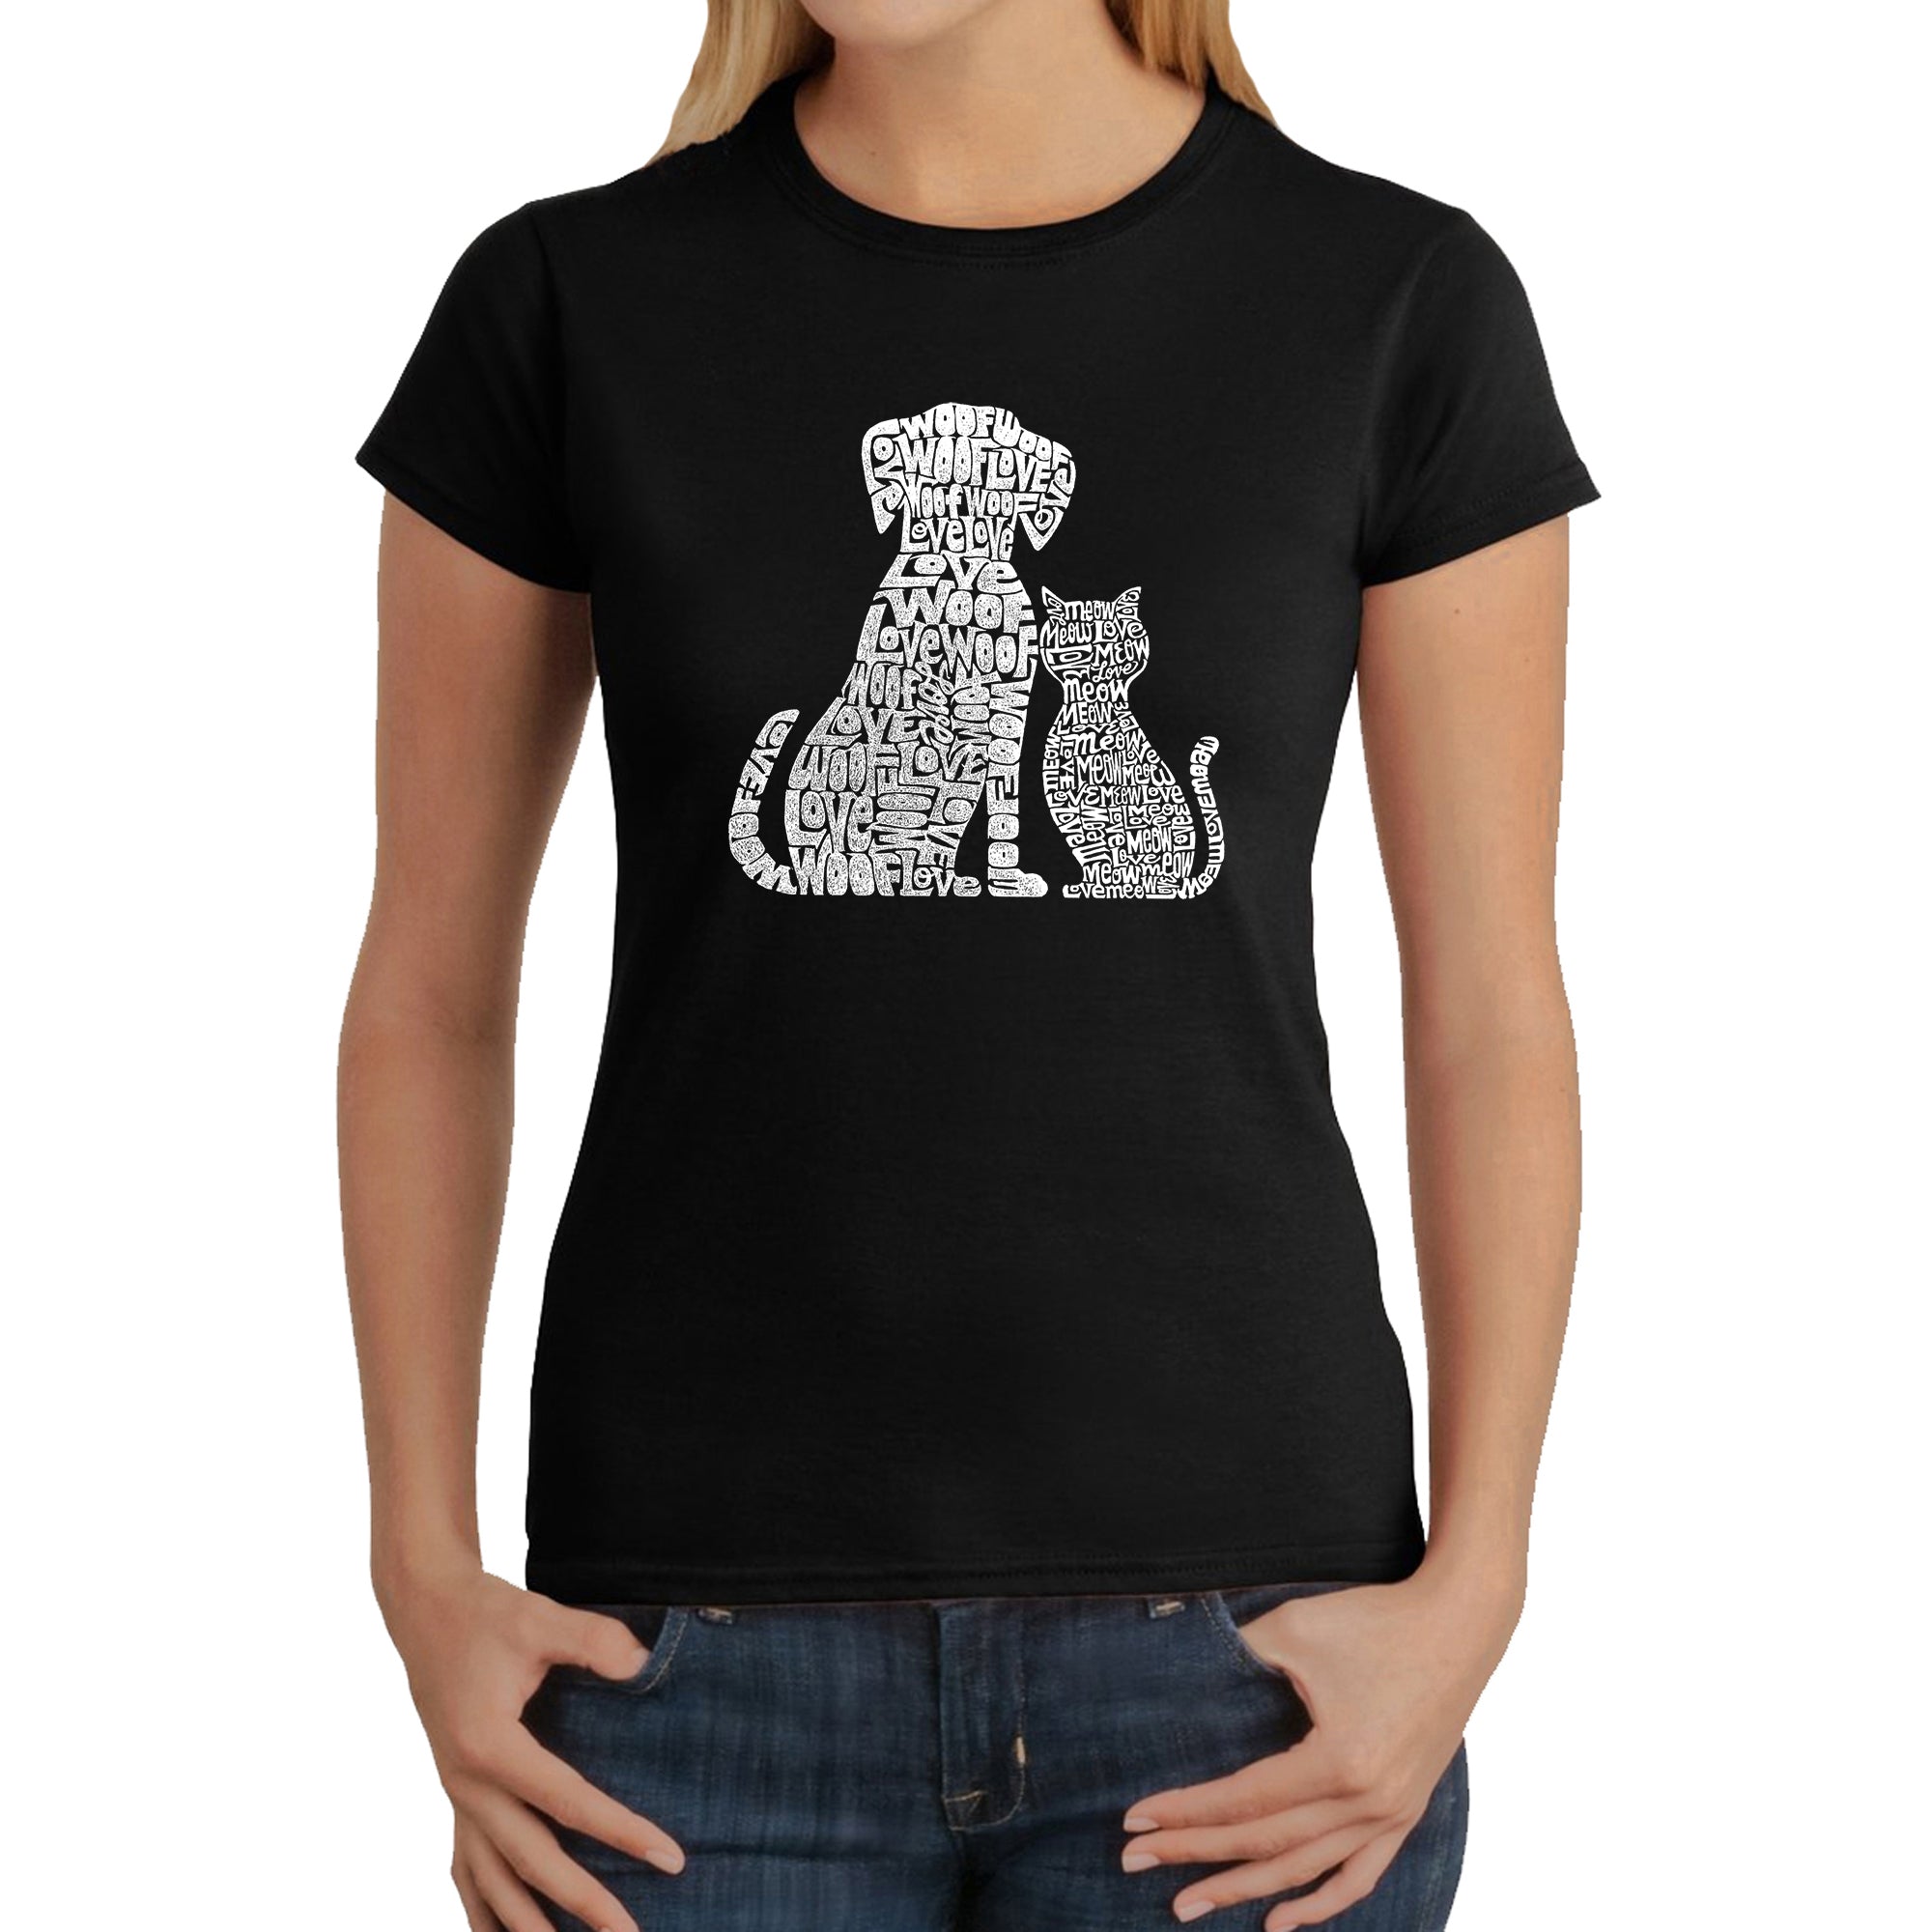 Dogs And Cats - Women's Word Art T-Shirt - Navy - X-Large